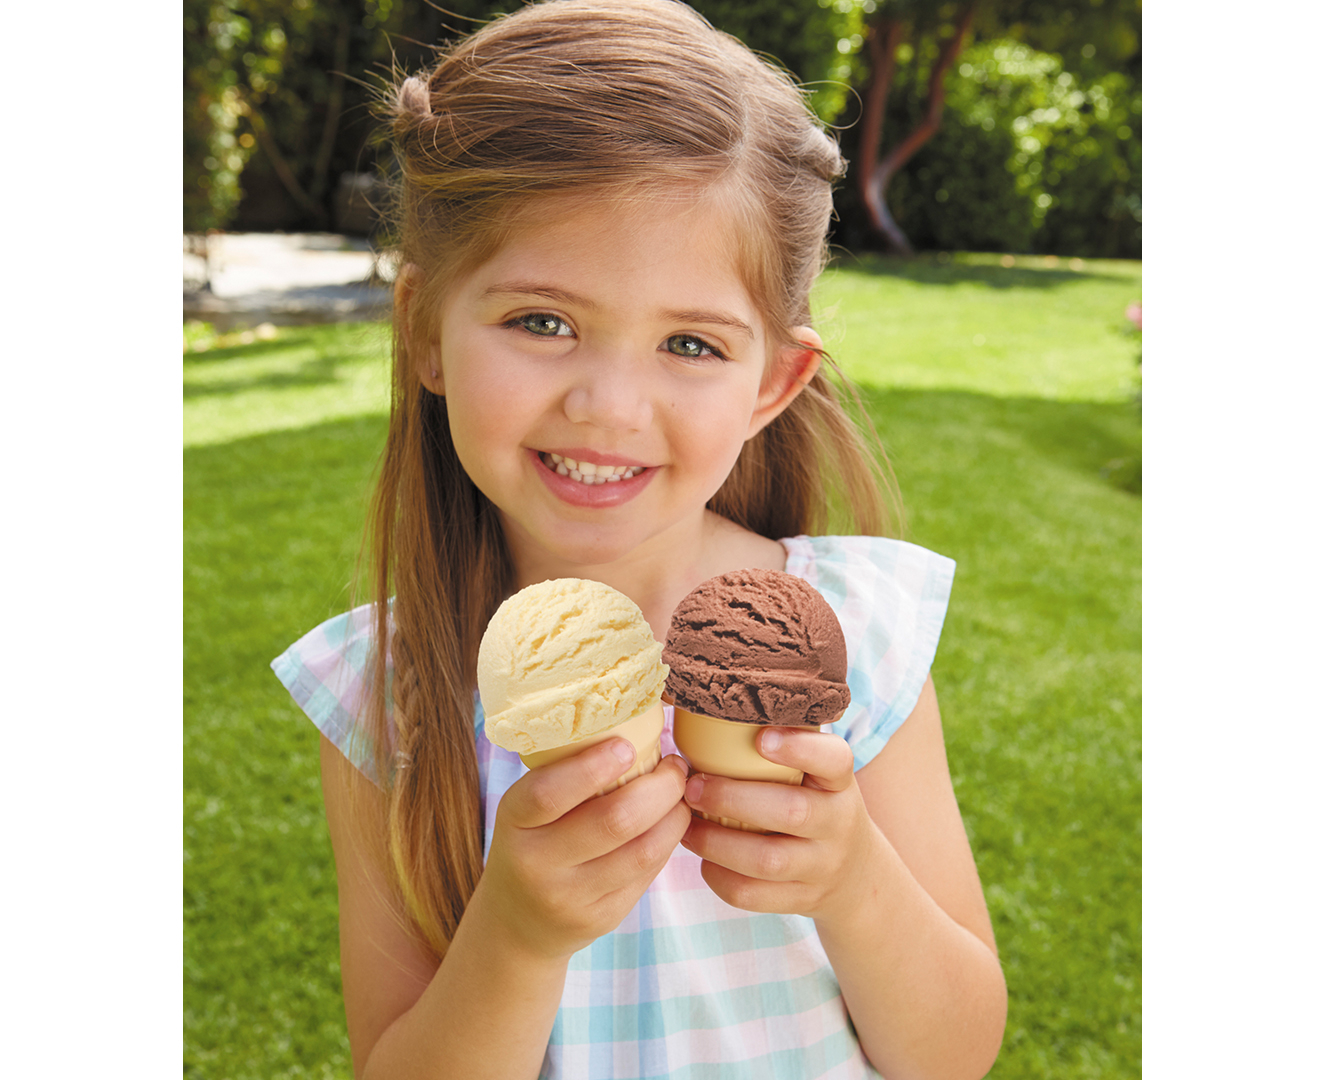 Now Make Real Ice Cream at Home  Little Tikes – Official Little Tikes  Website